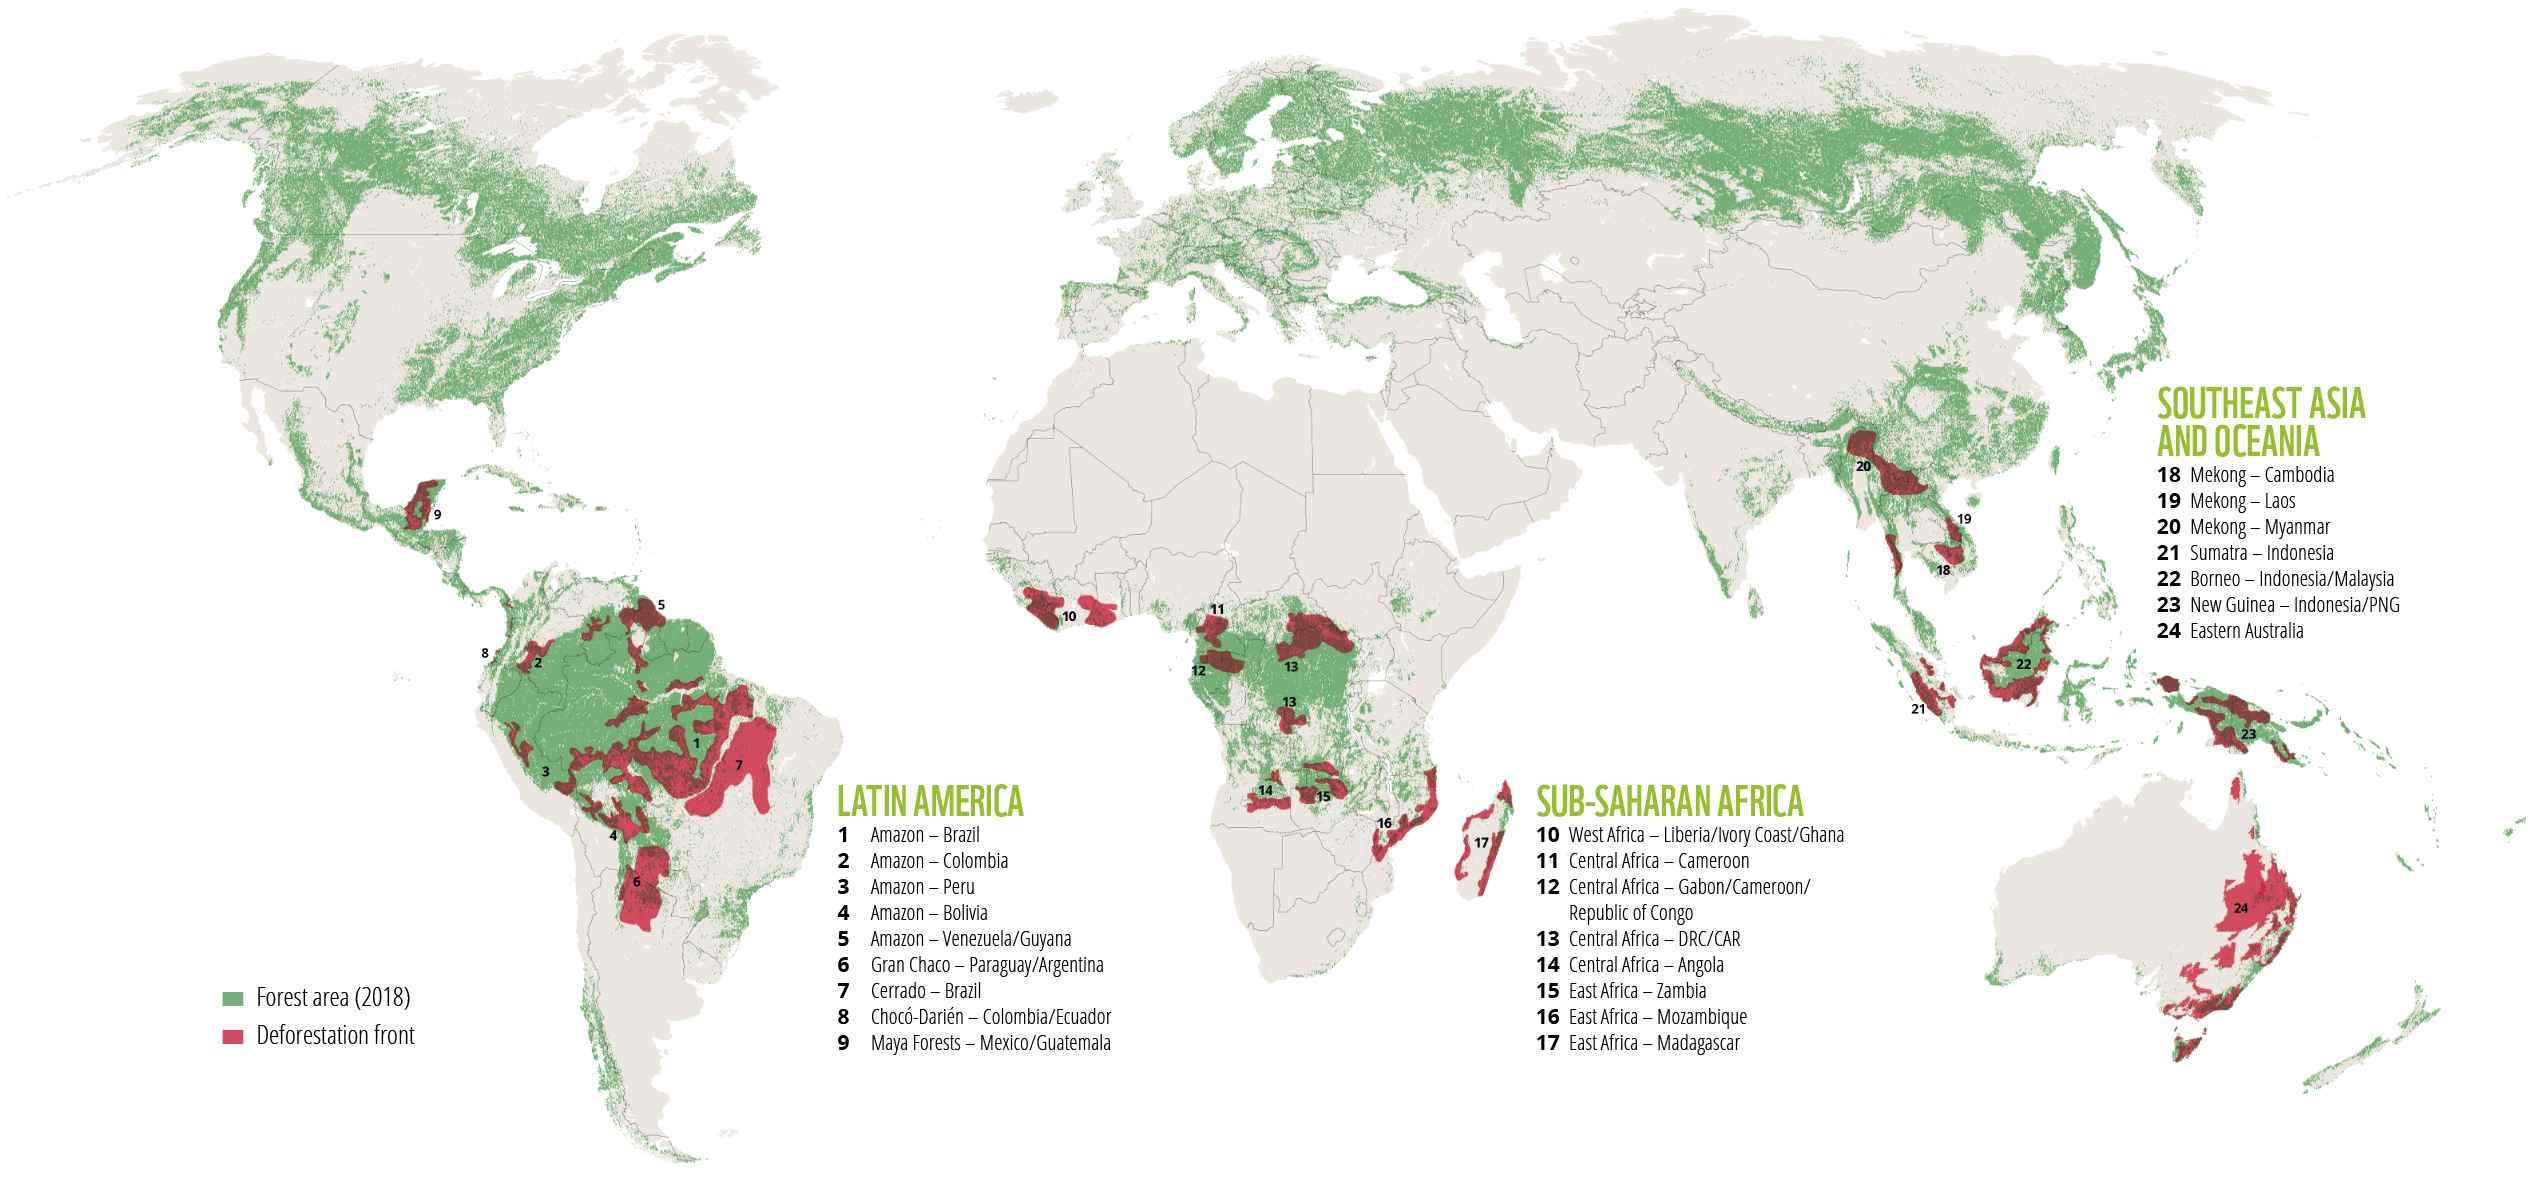 Most forest loss is clustered in 24 deforestation fronts Insert map